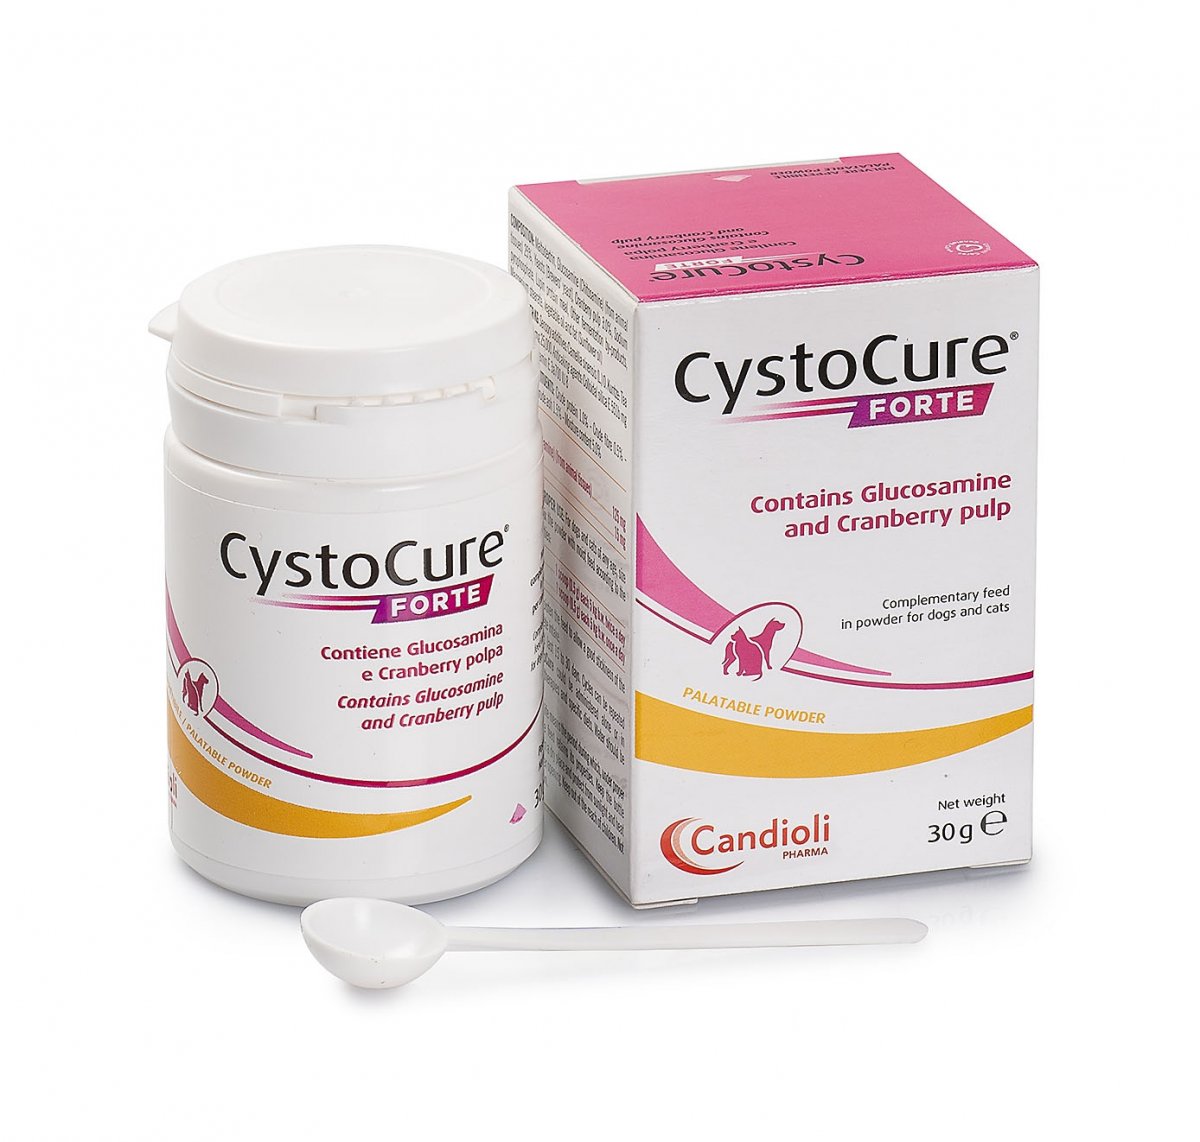 Cystocure forte polvos